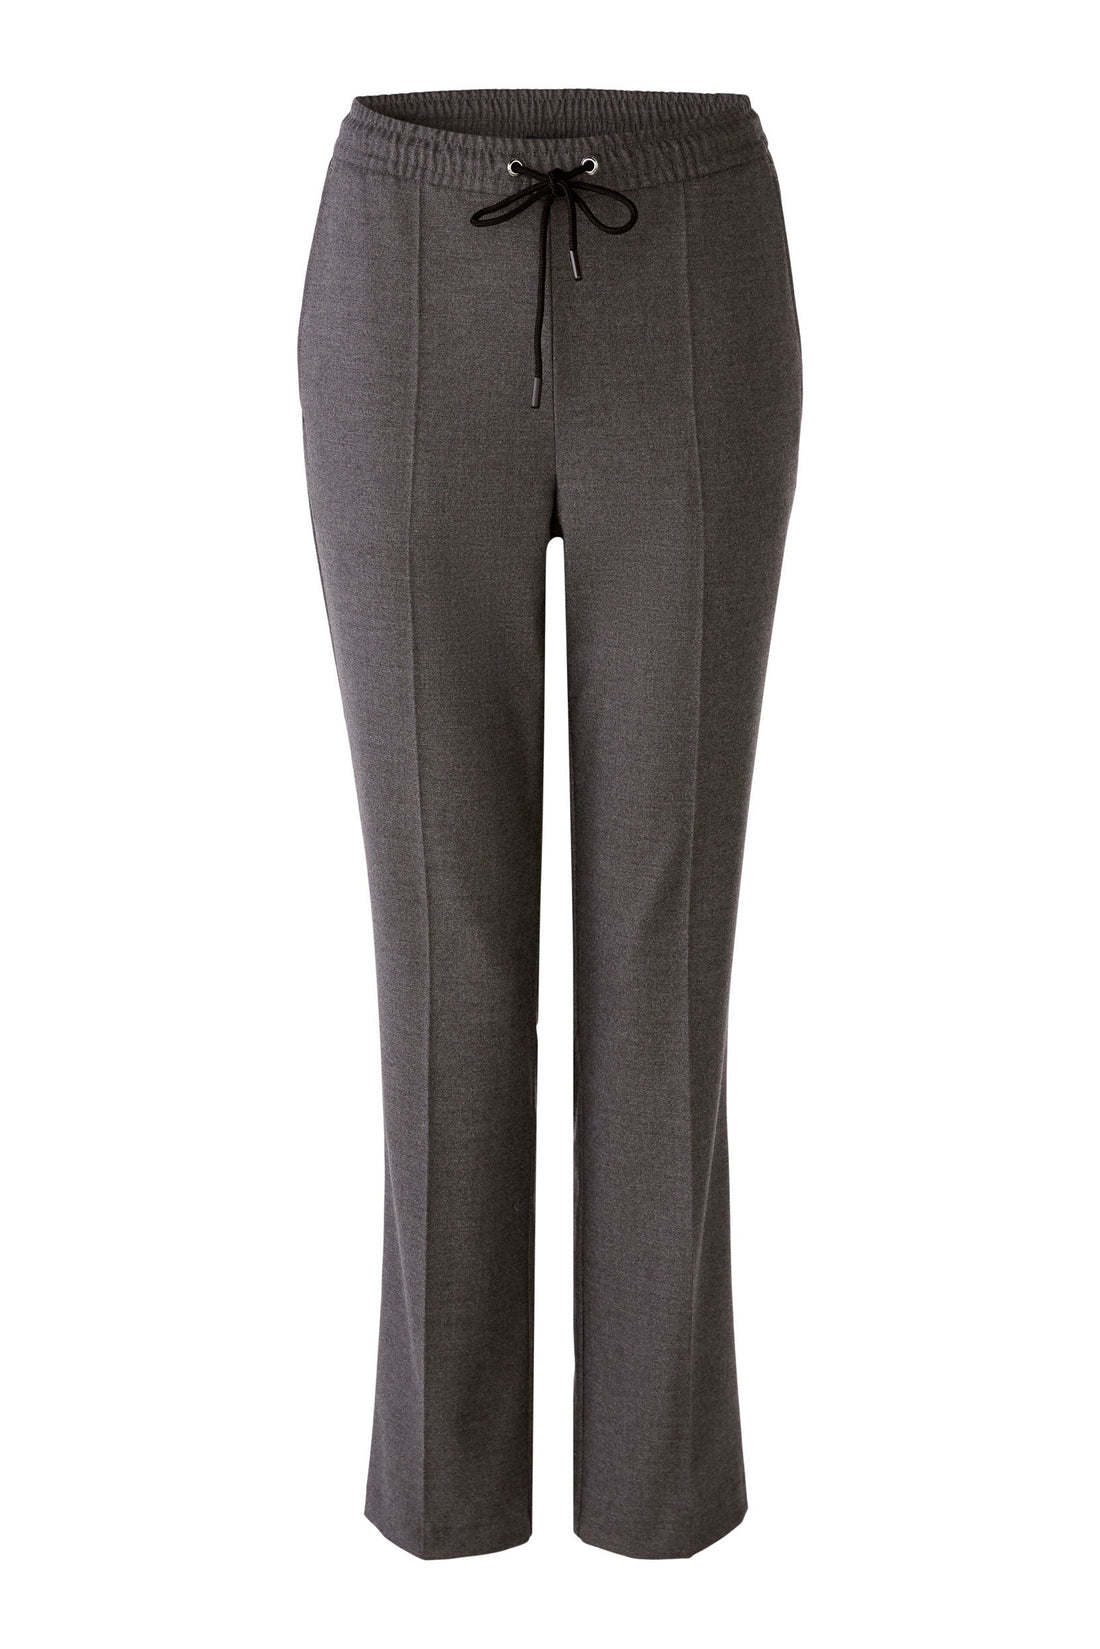 Grey Slip On Trousers With Drawstrings_79761_9783_01